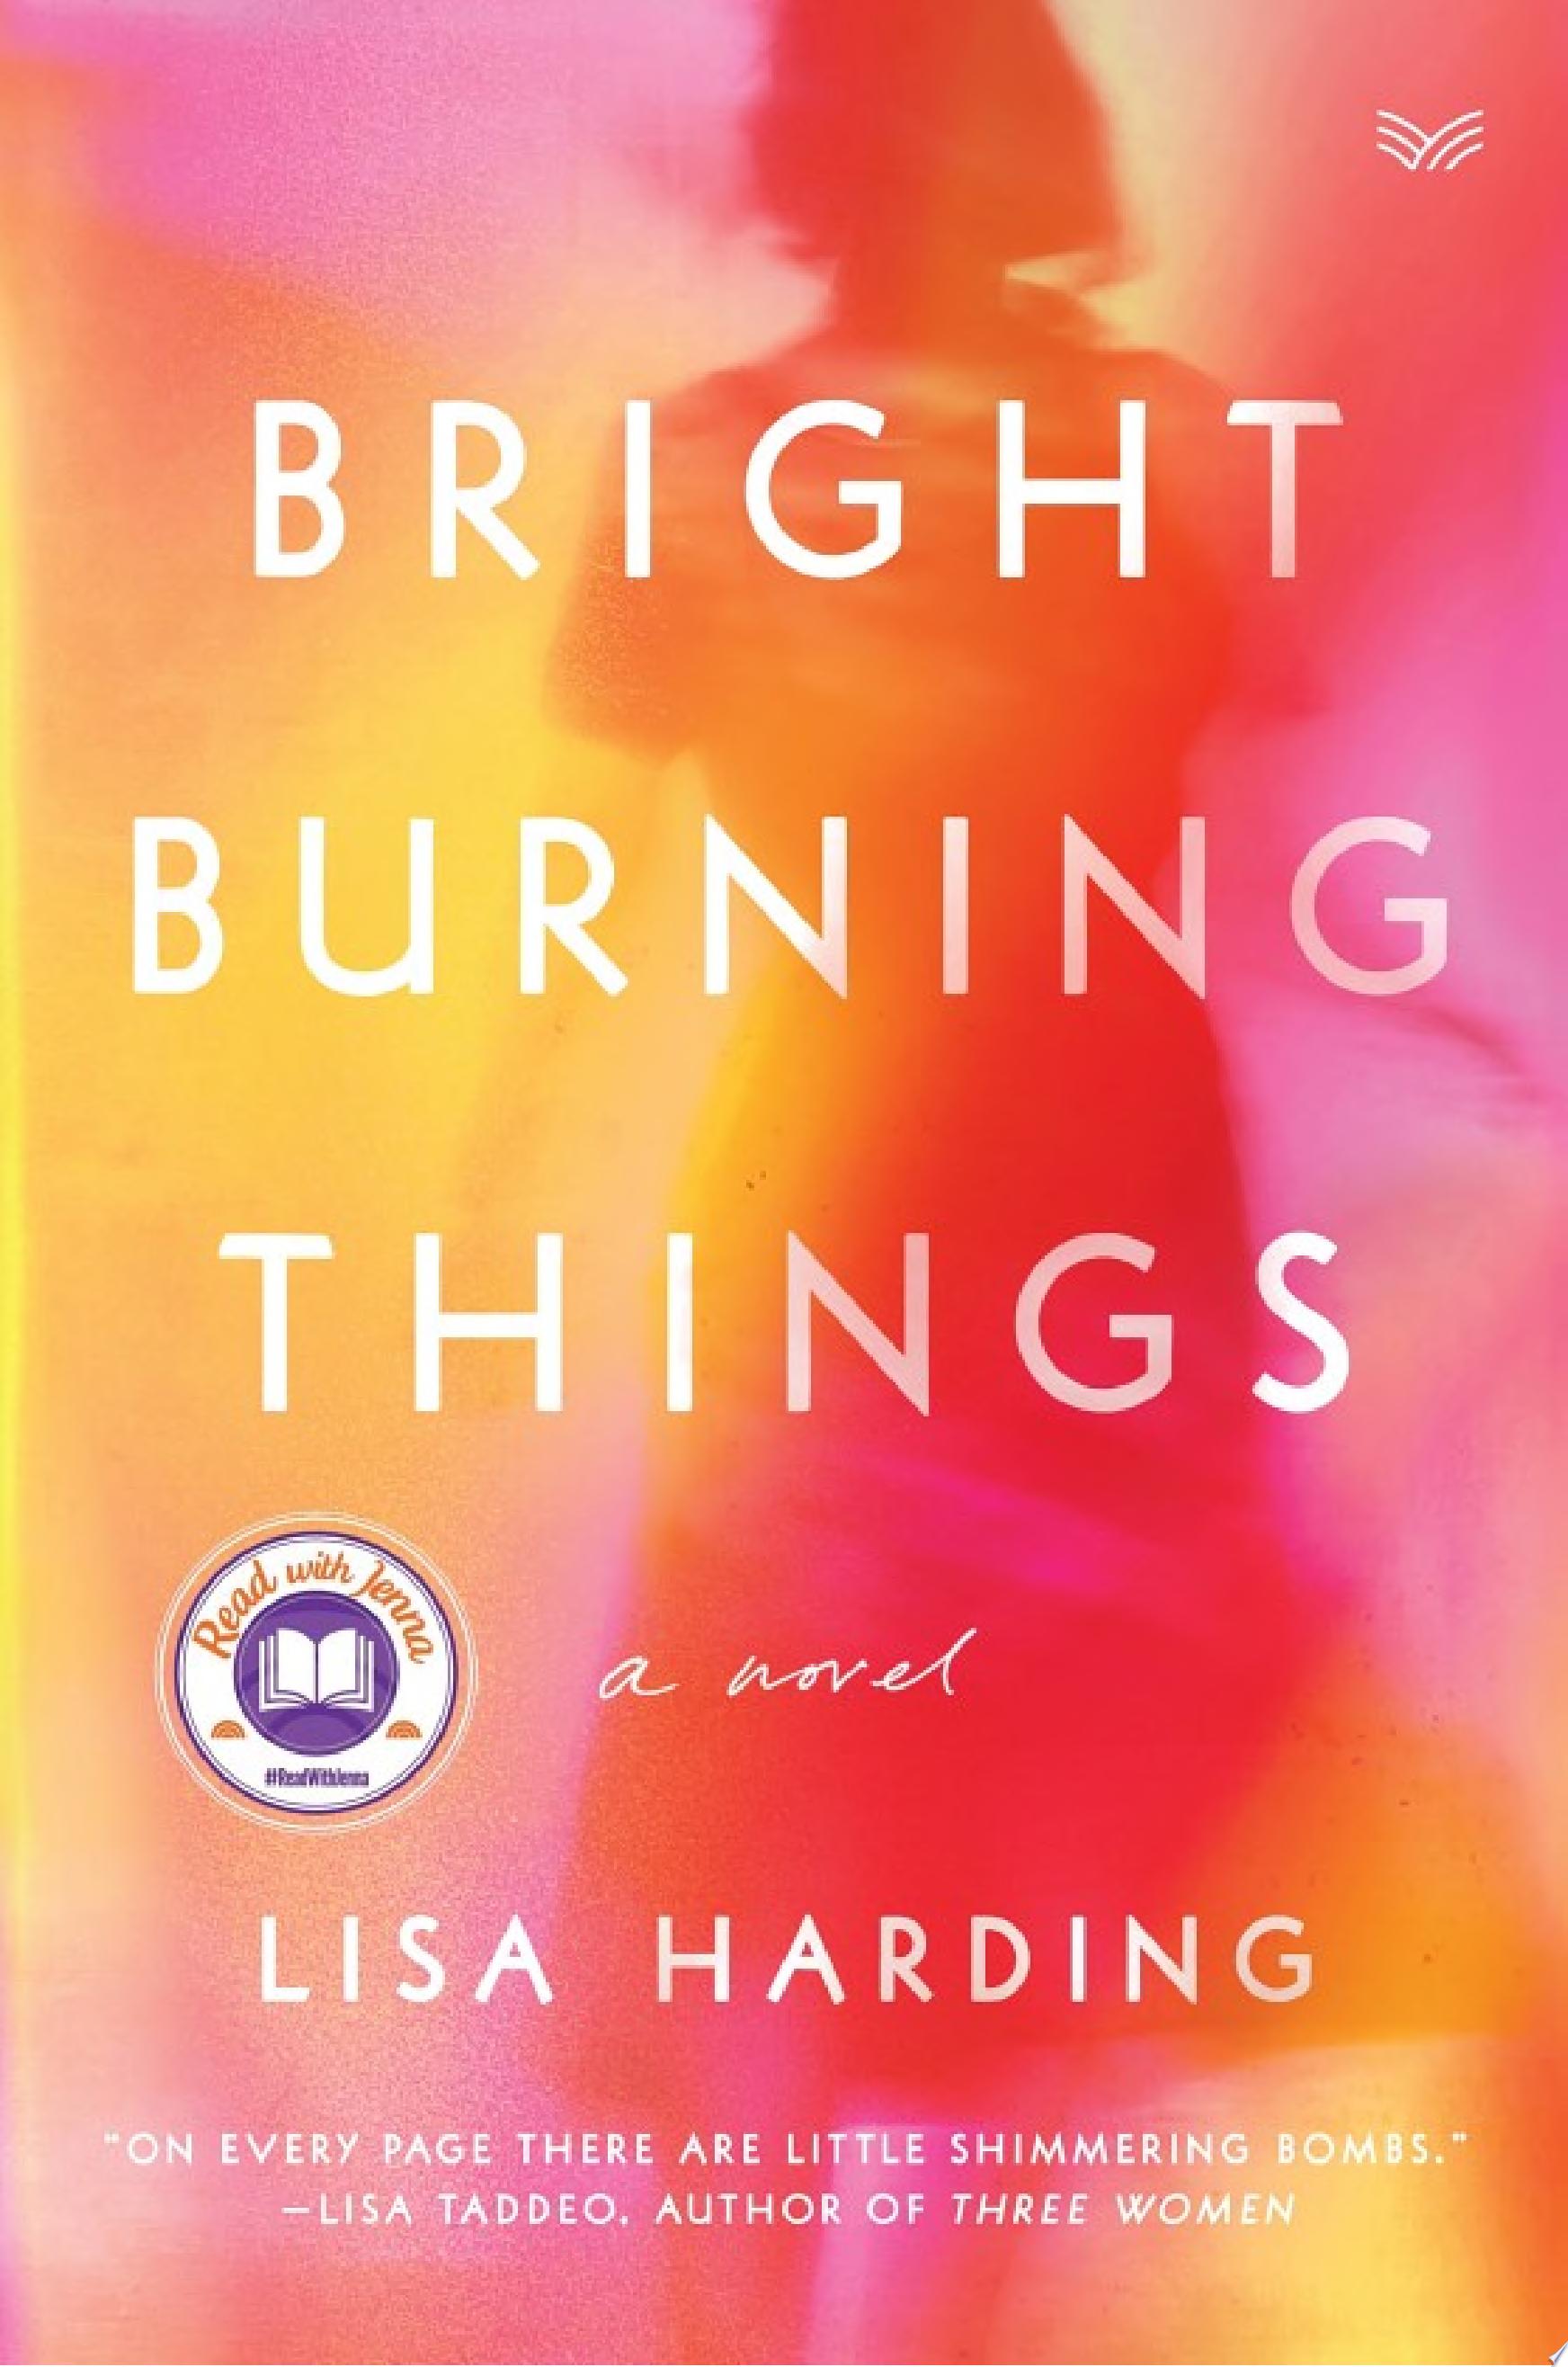 Image for "Bright Burning Things"